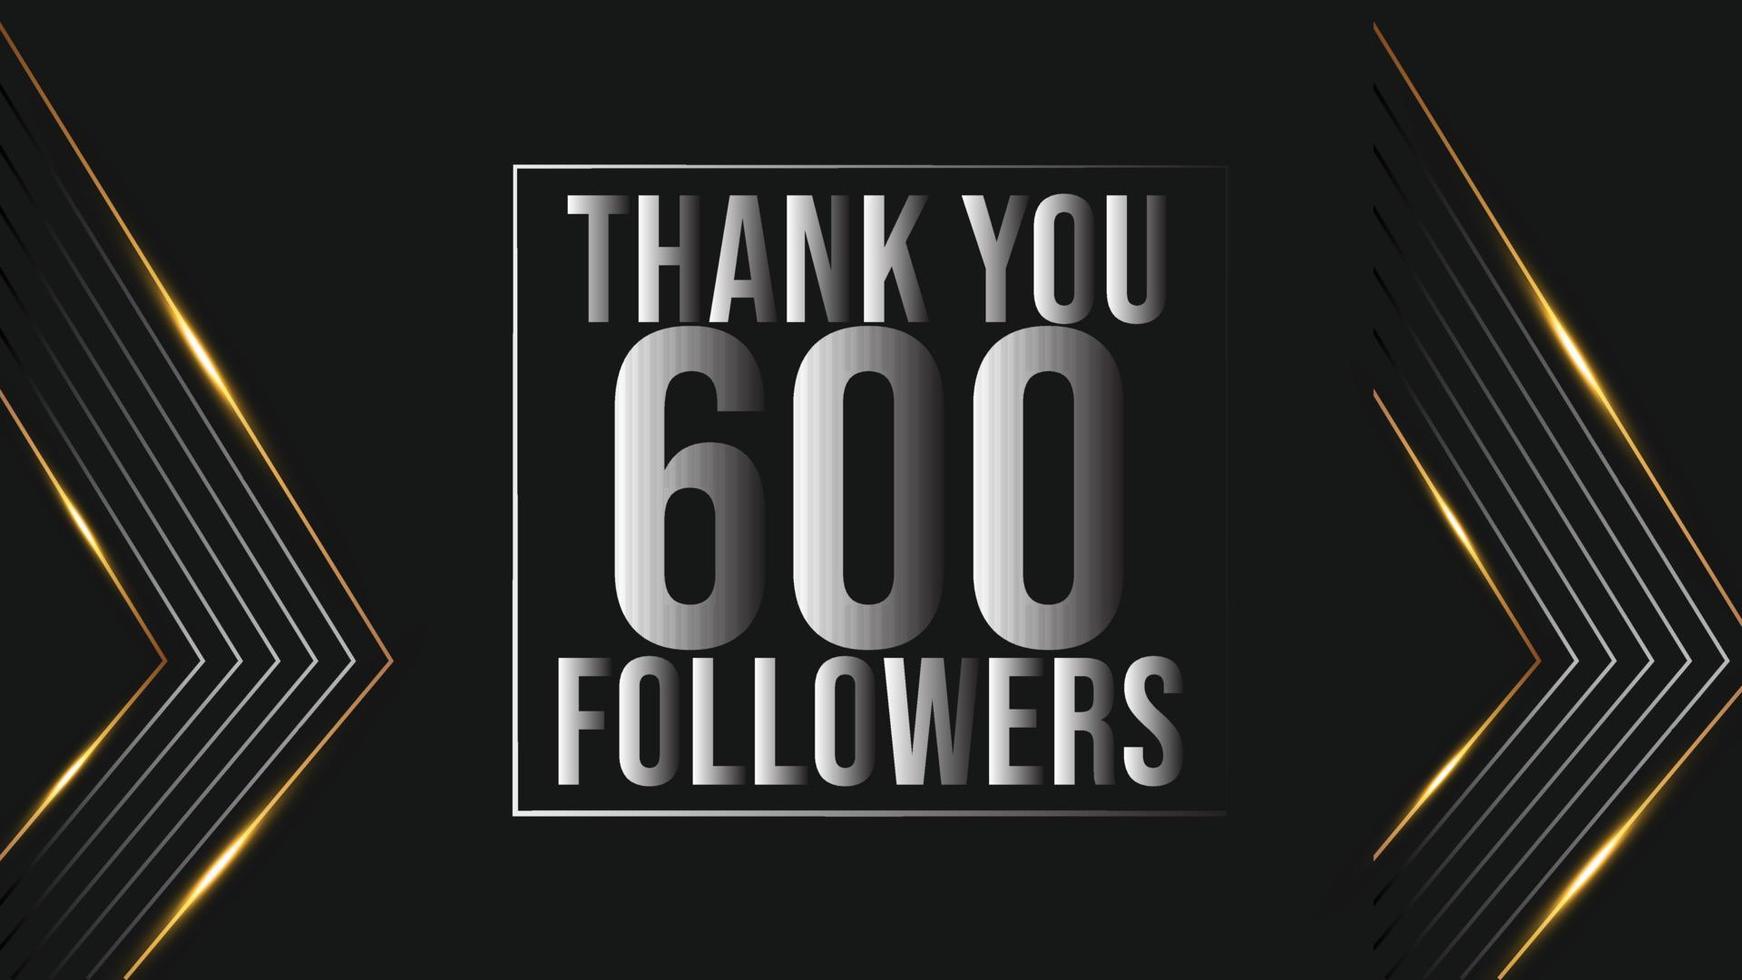 Thank you template for social media six hundred followers, subscribers, like. 600 followers vector